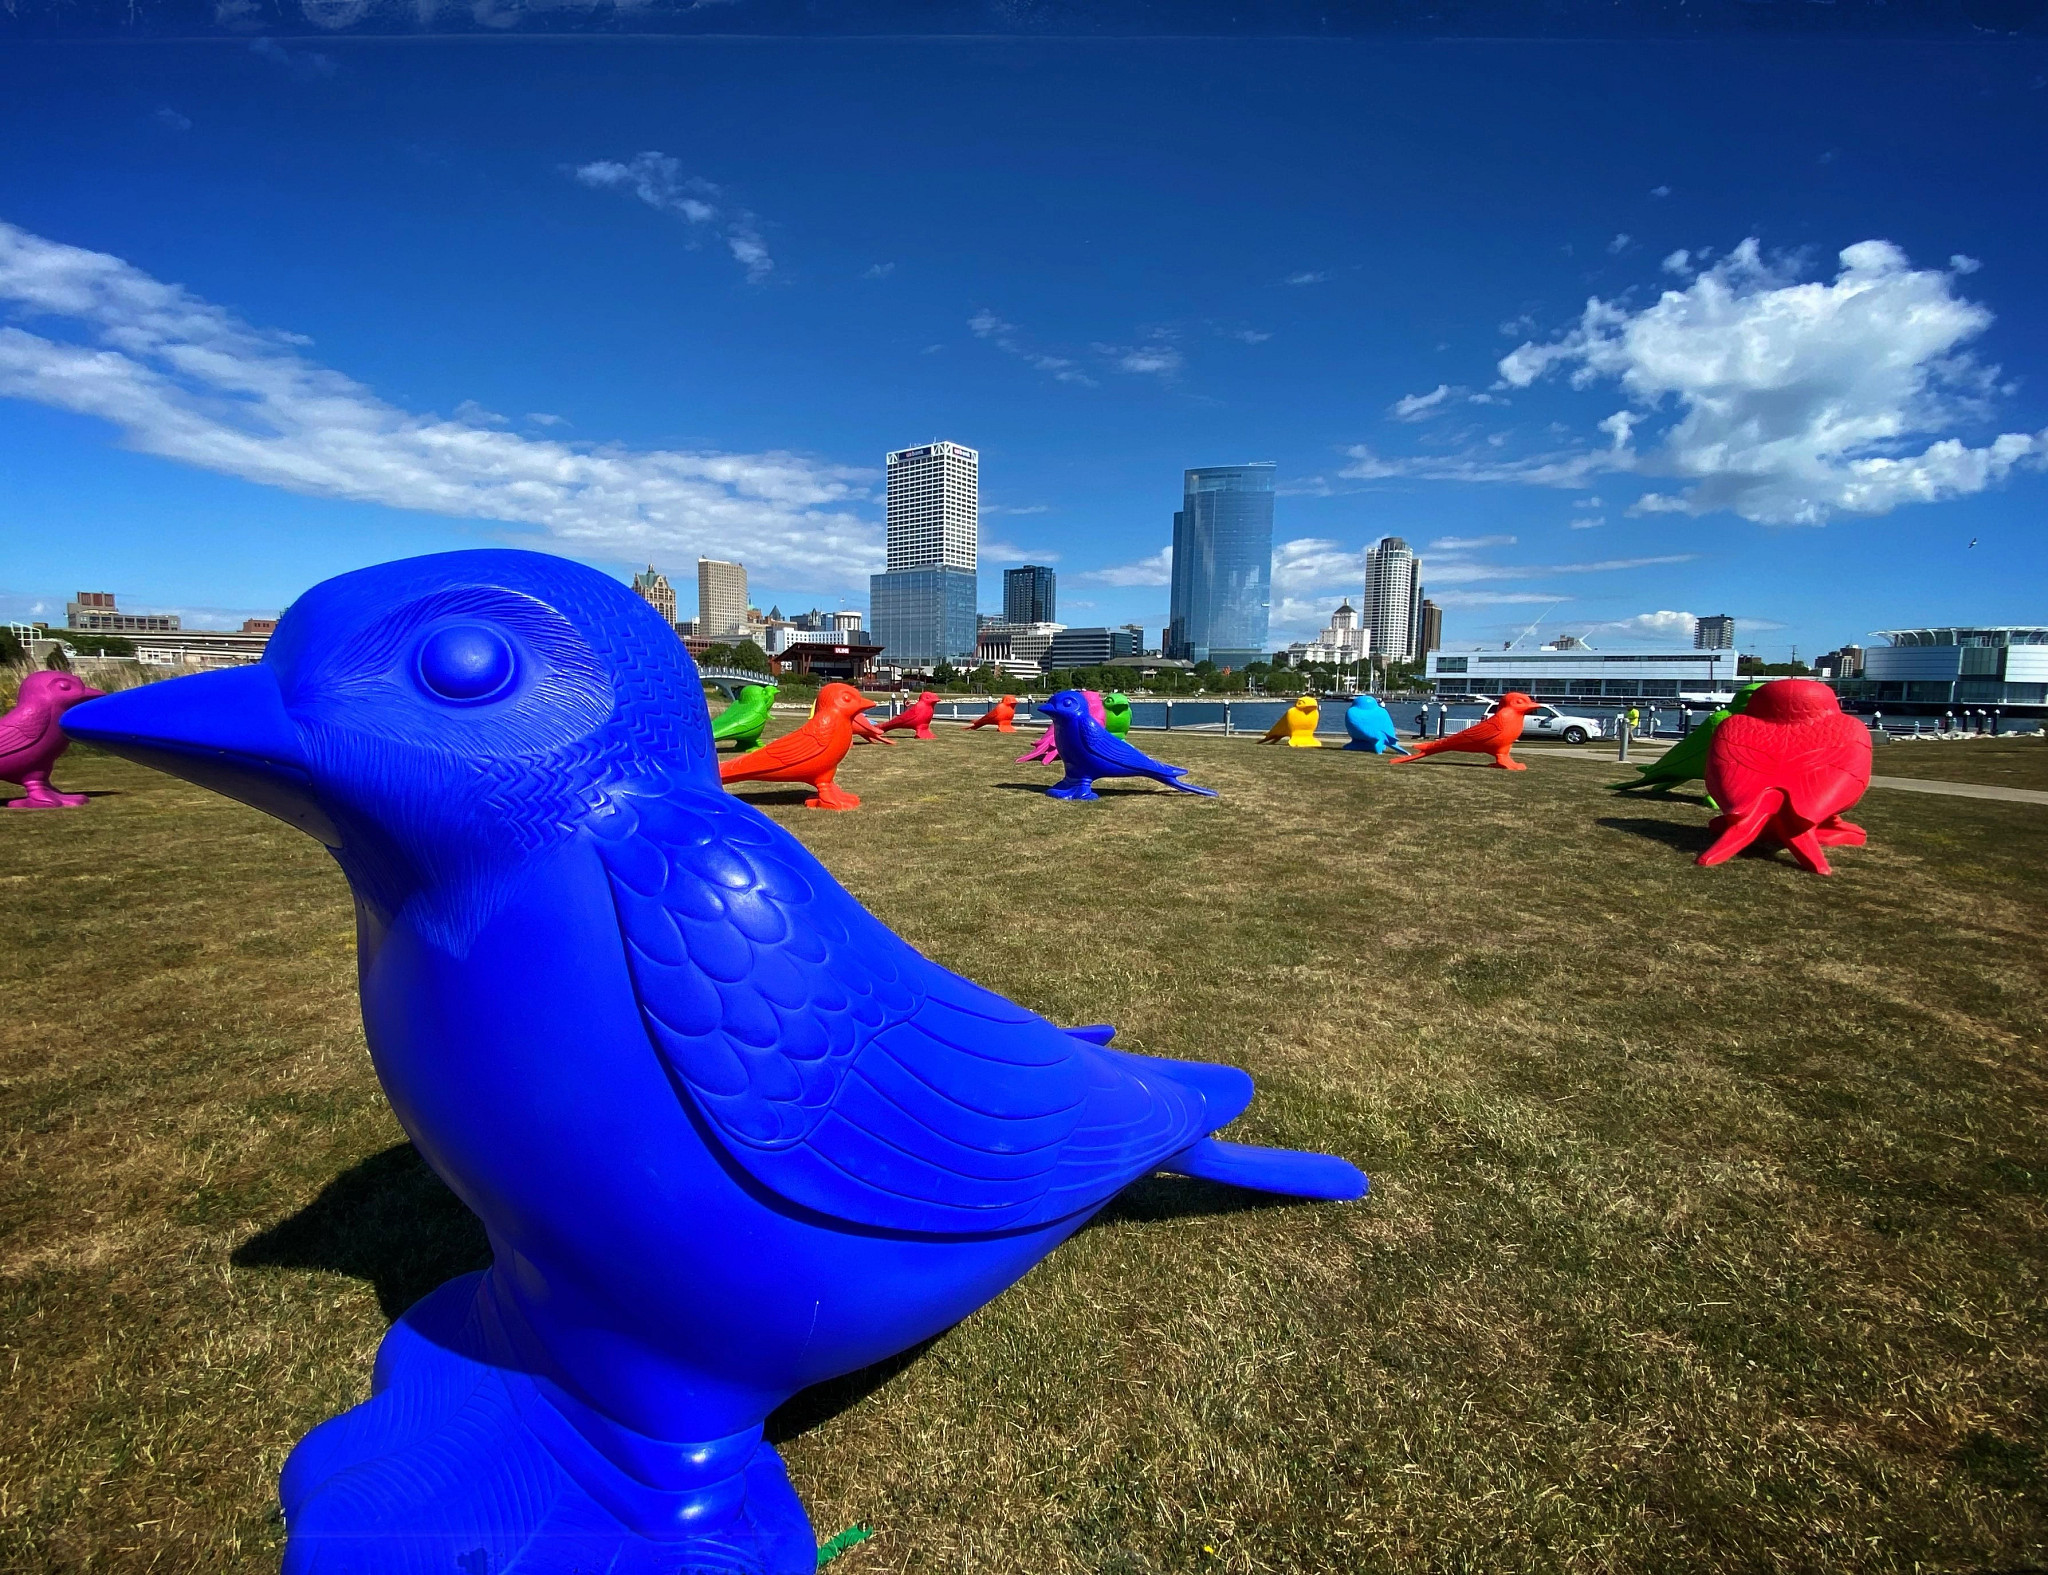 A cluster of large, colorful swallow sculptures on the grass in front the Milwaukee skyline.